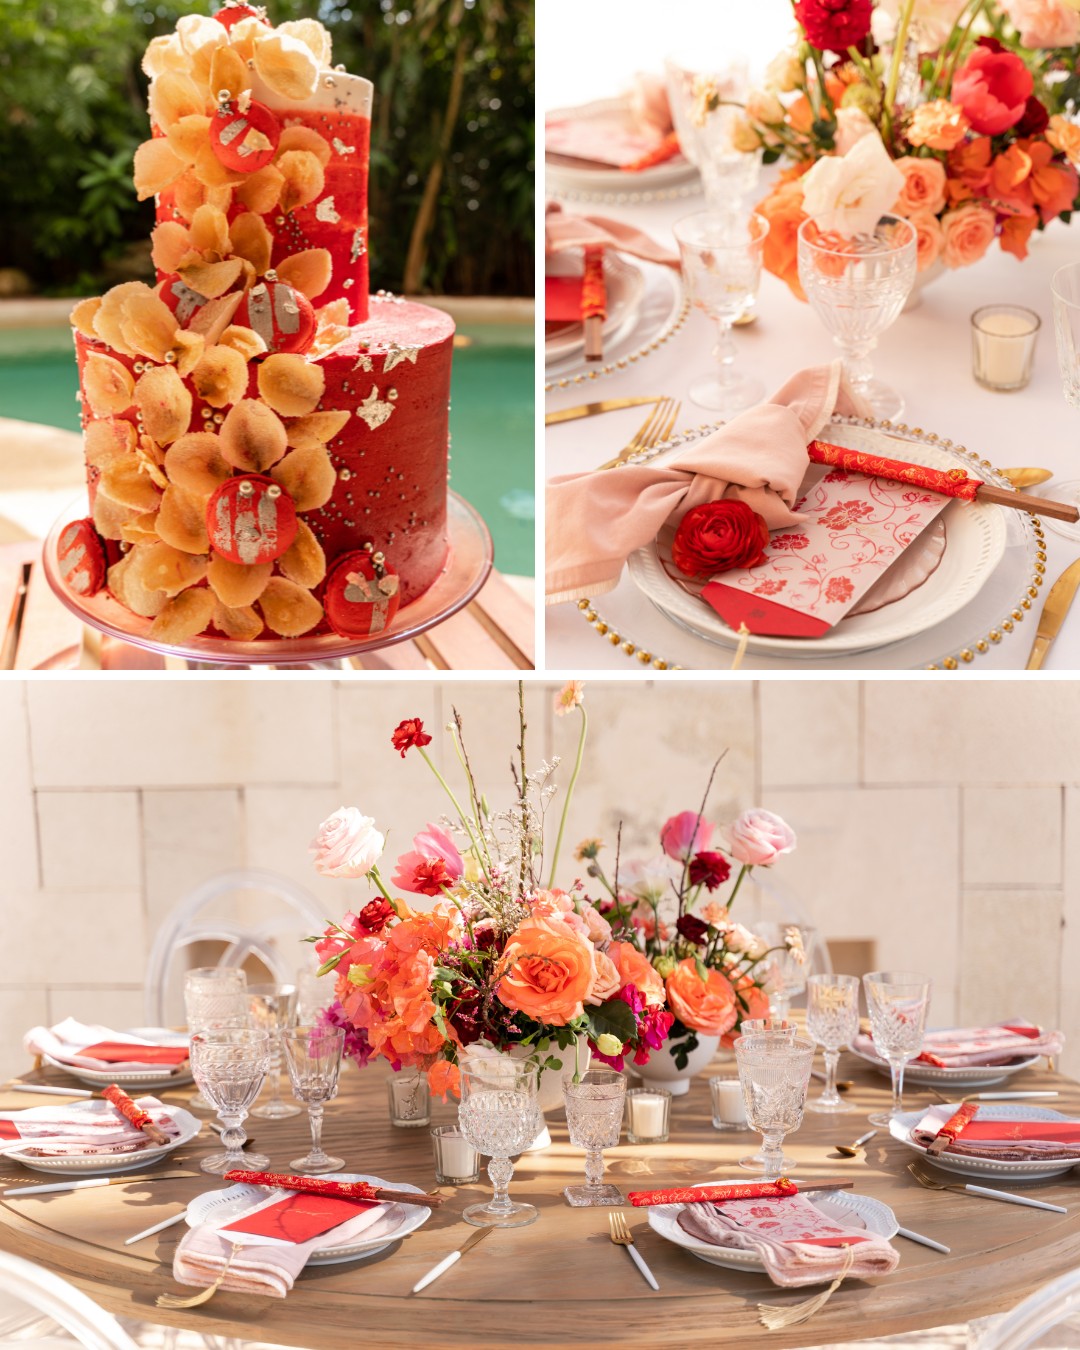 Red 2 tiered cake and collage of place settings and florals